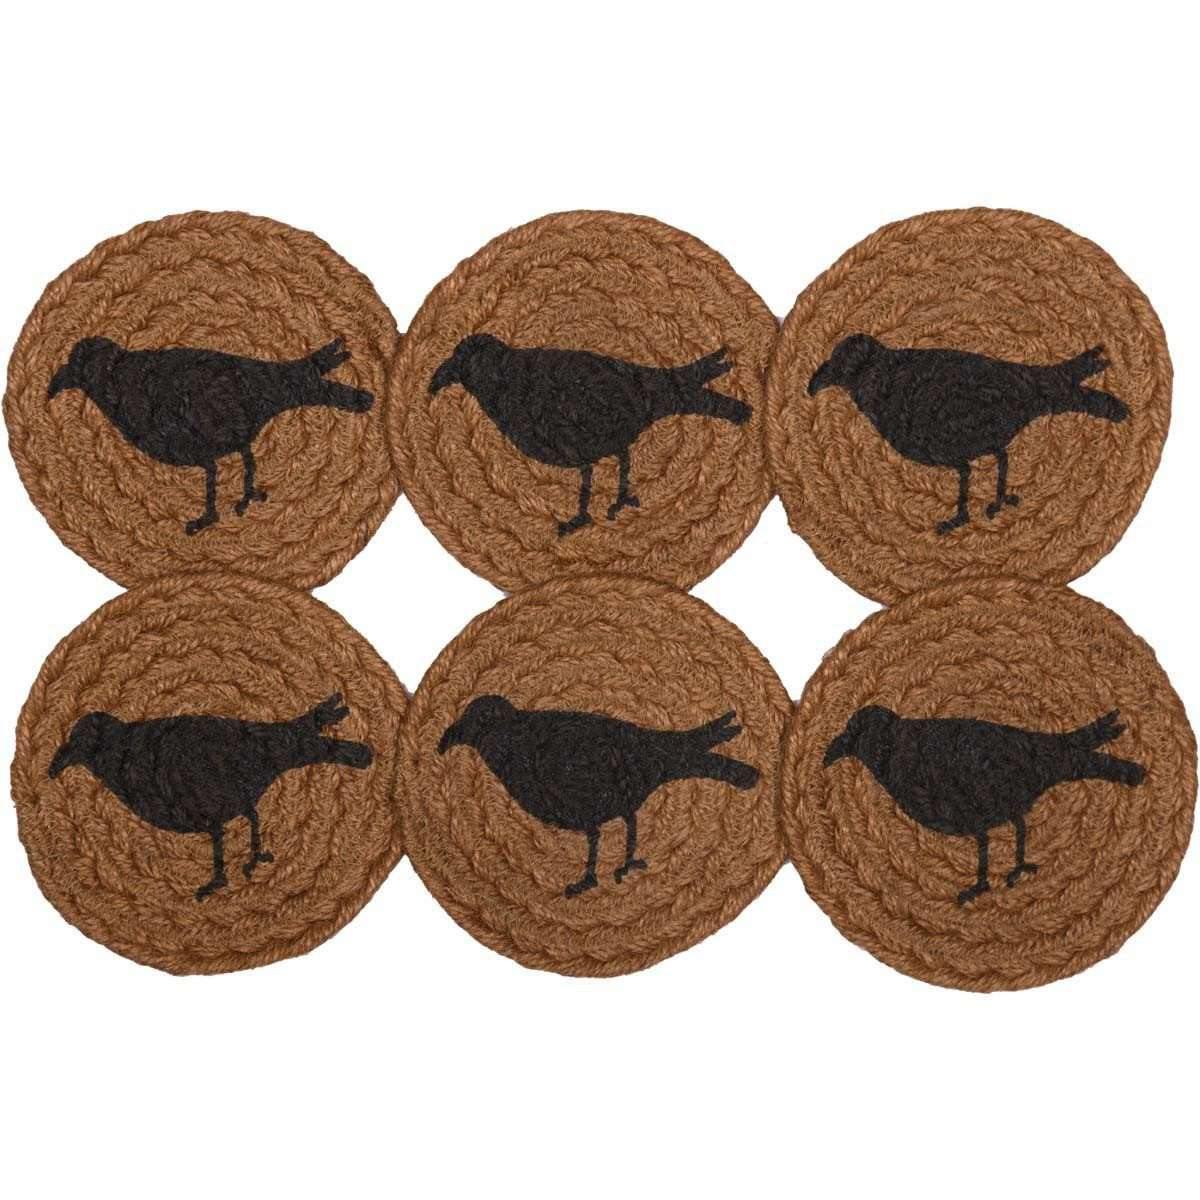 Heritage Farms Crow Jute Coaster Set of 6 VHC Brands